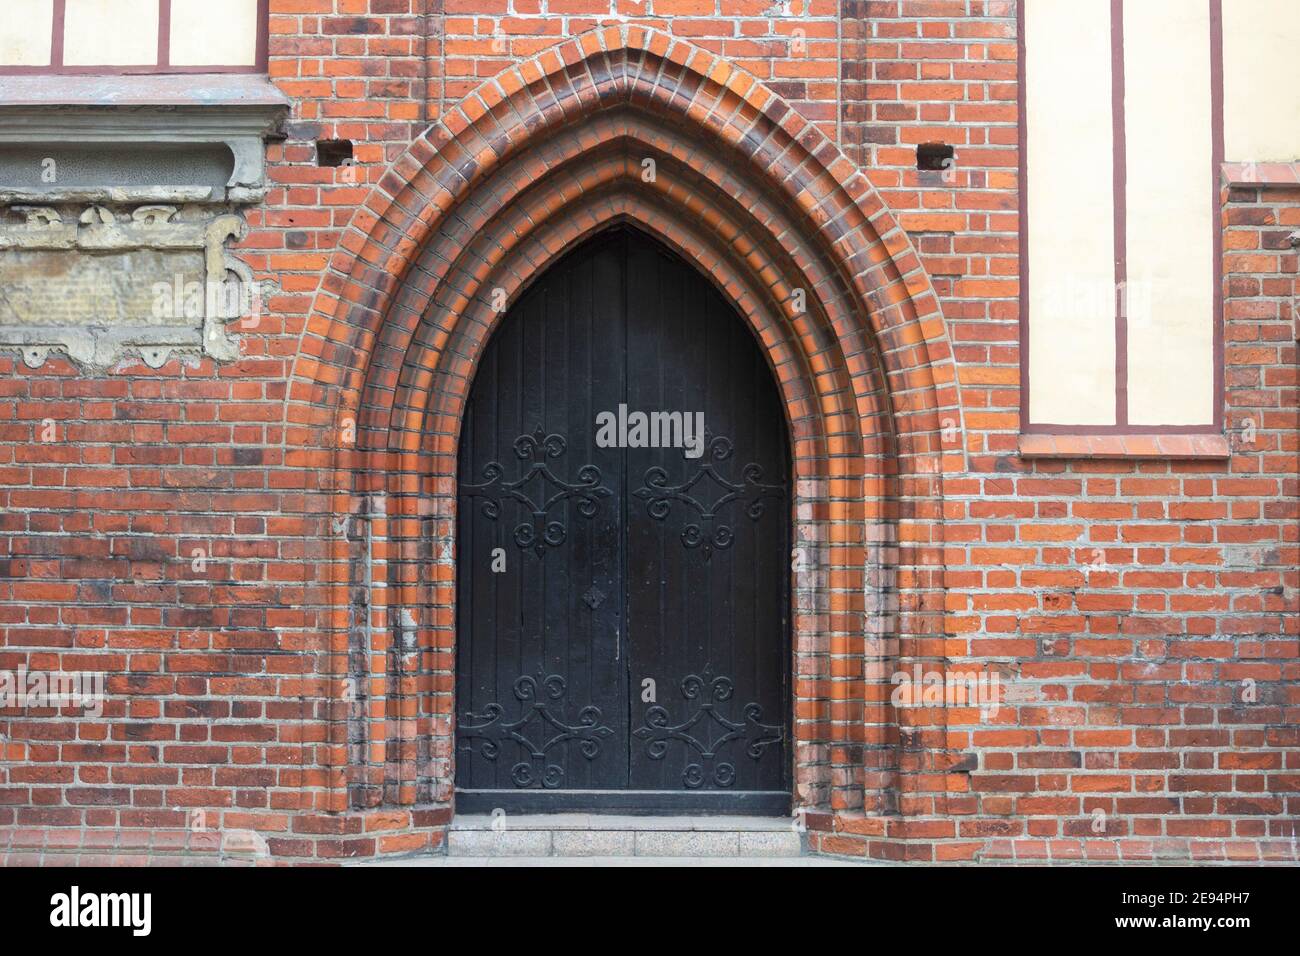 Large double doors in arch of the old castle. Ancient architecture of Europe. Stock Photo